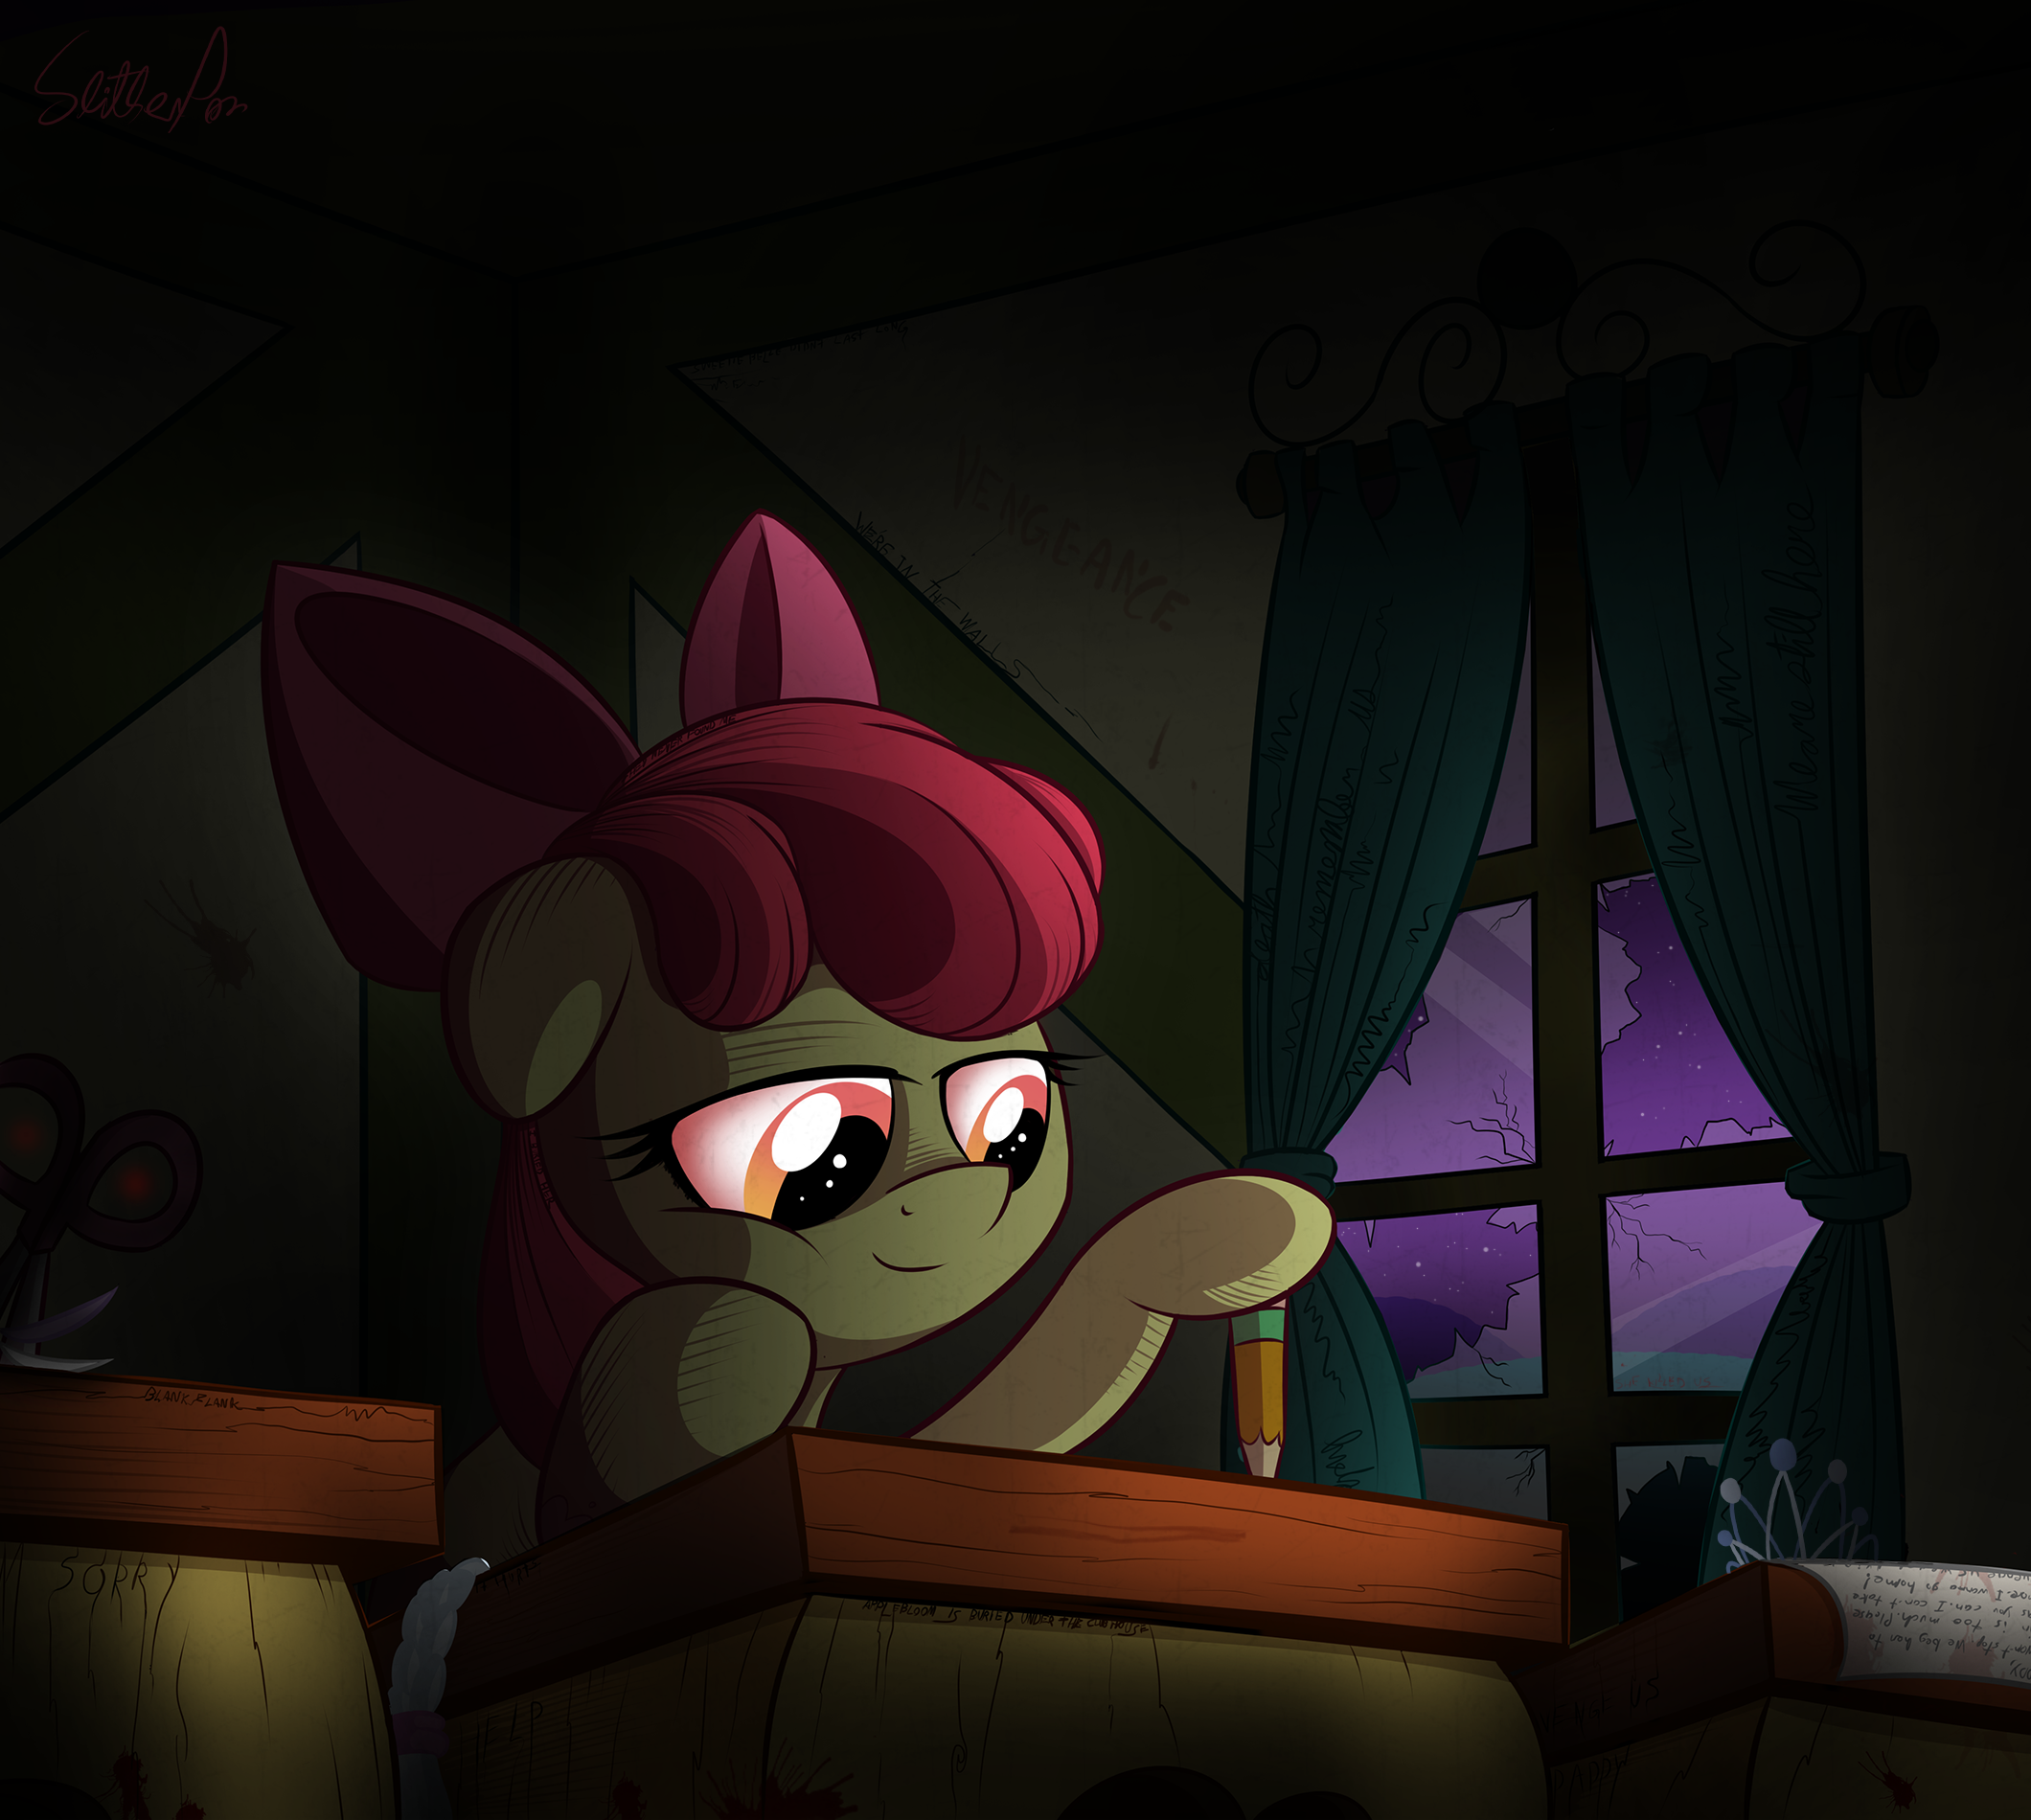 night_school_by_slitherpon-d773jk9.png